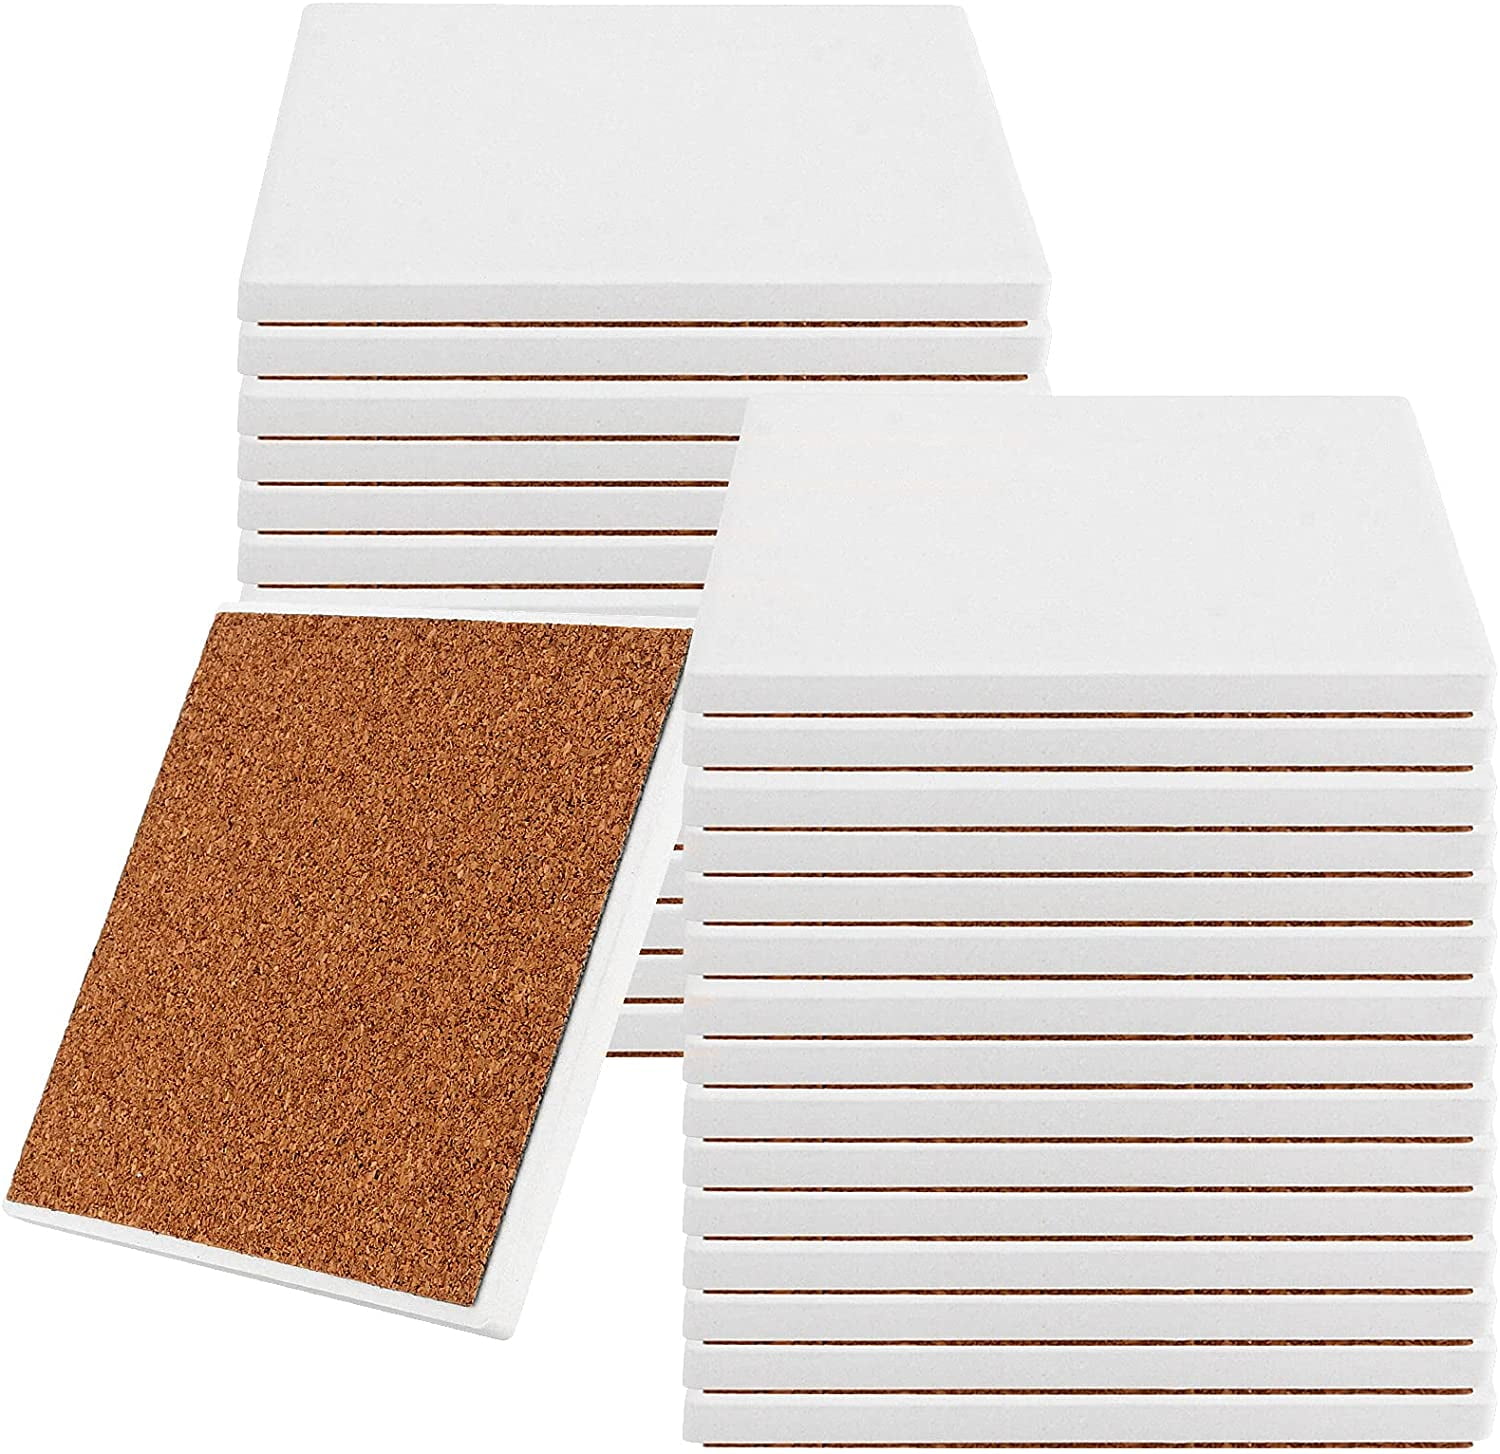 50 Pack Ceramic Tiles for Crafts Coasters, Round White Tiles